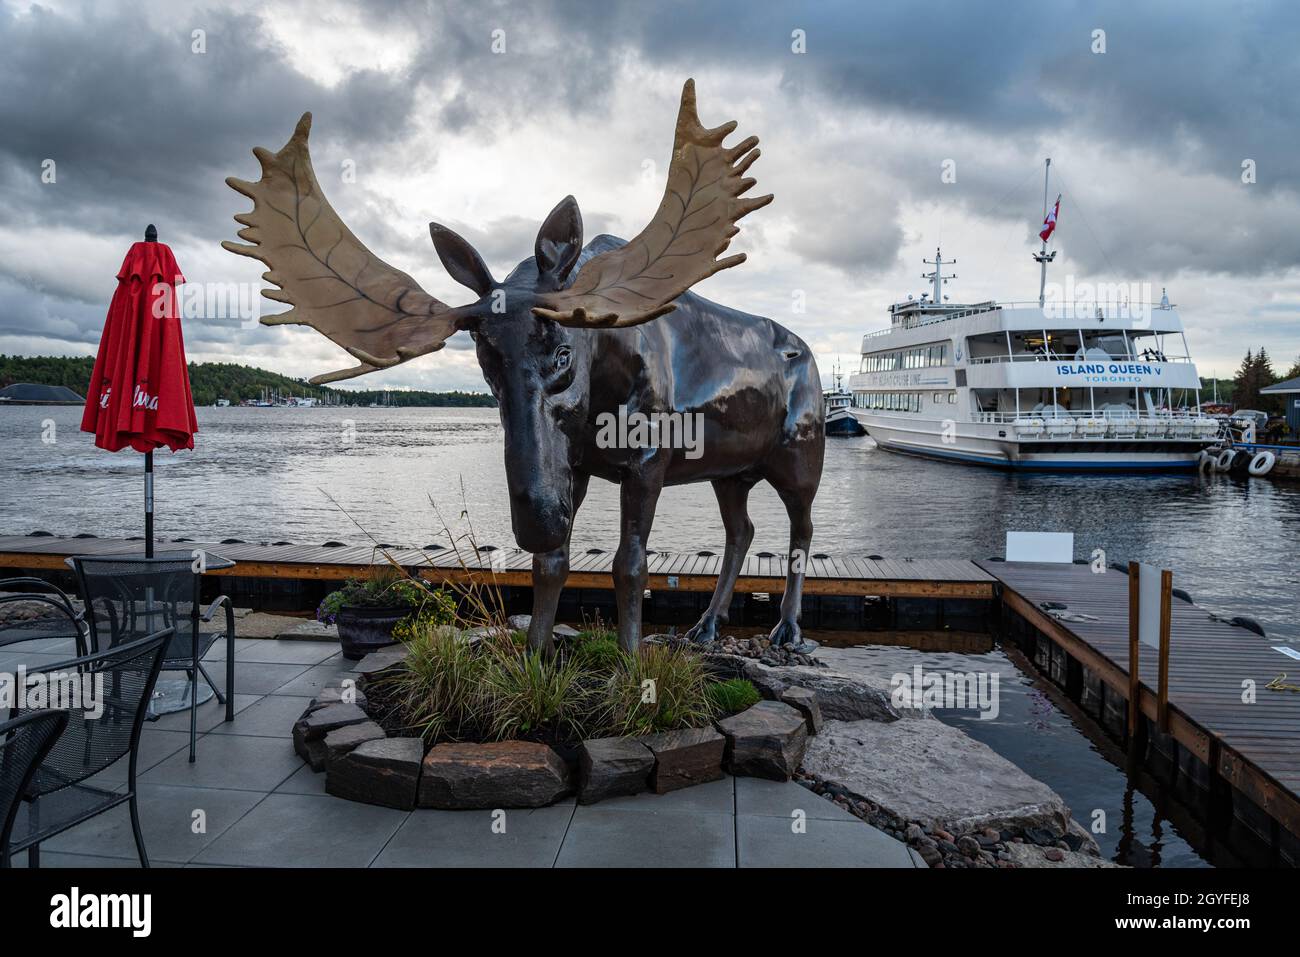 A photo of the large moose sculpture at the marina, with Island Queen ferry in the background. Stock Photo